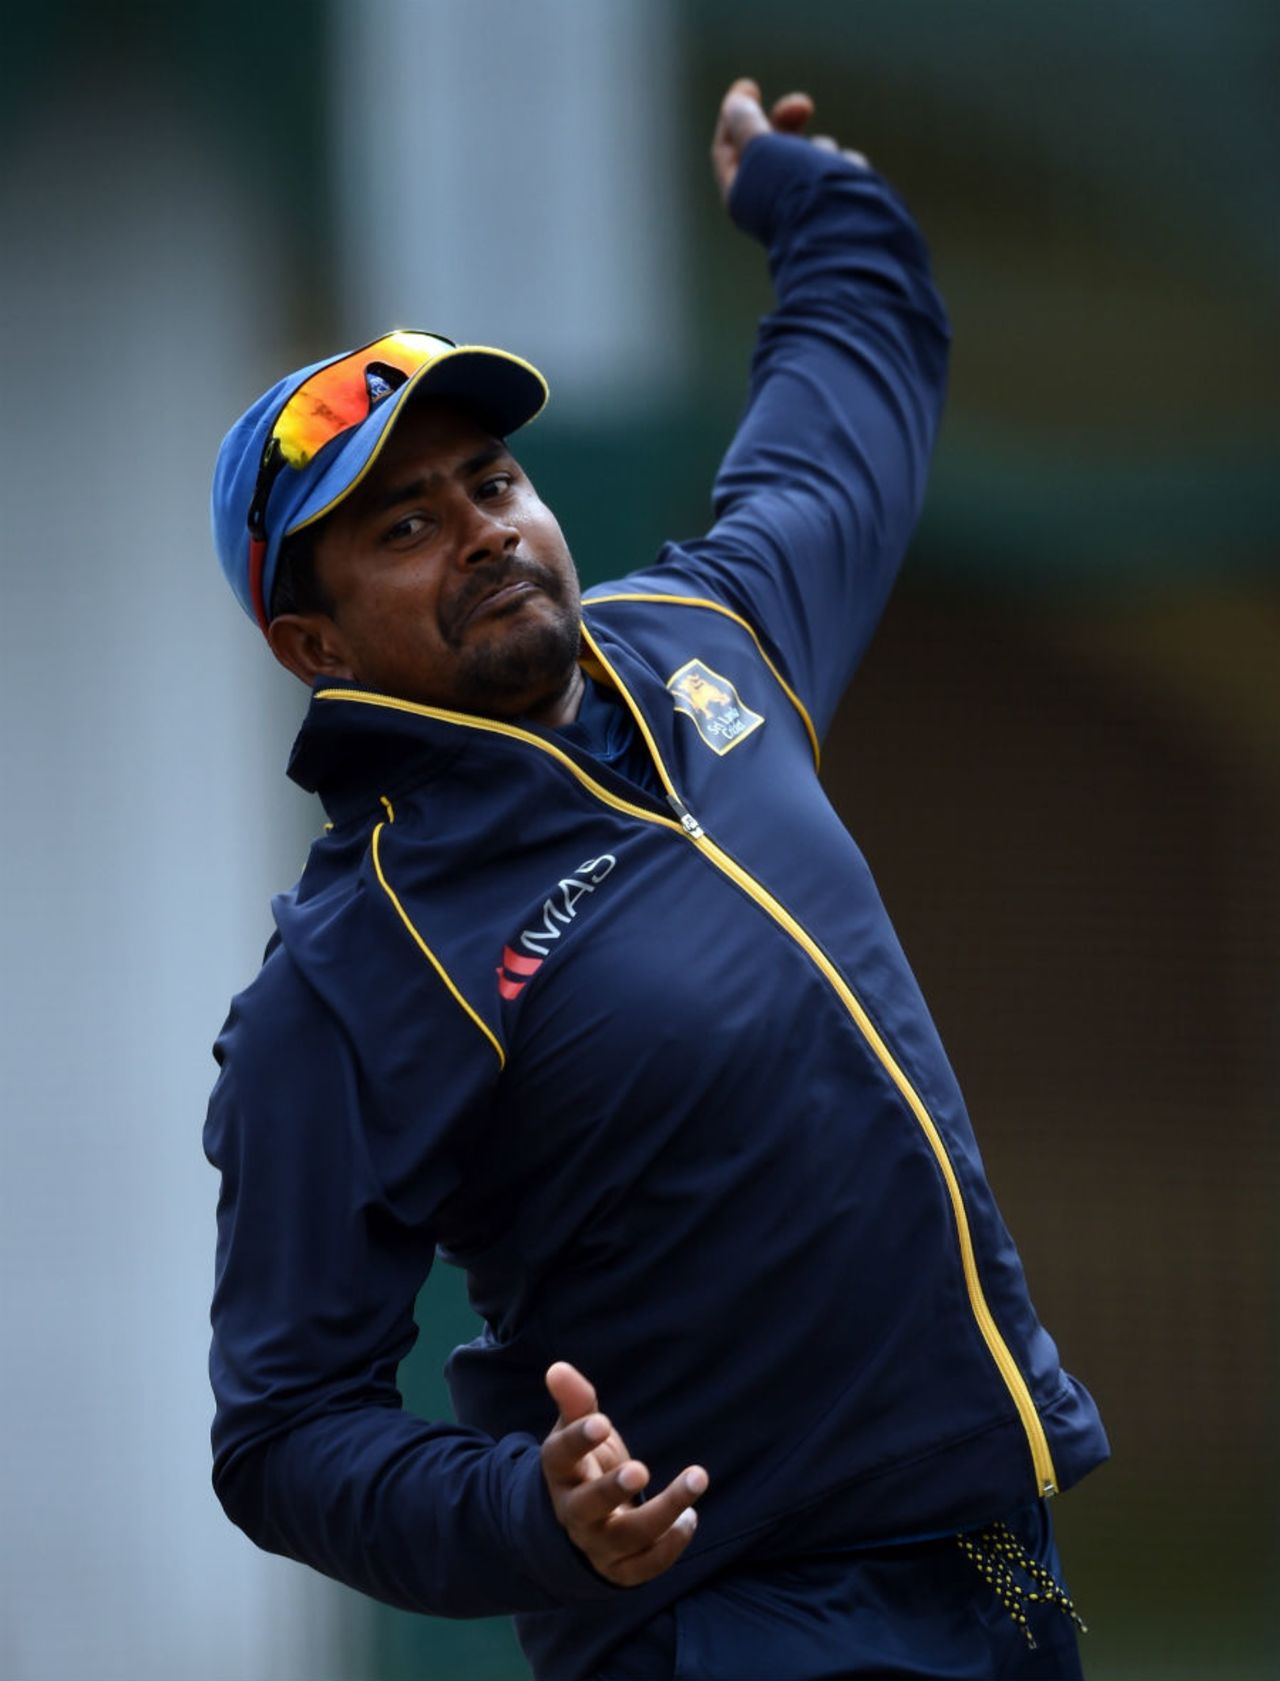 Rangana Herath shadow practises his bowling at a training session, World Cup 2015, Sydney, March 16, 2015